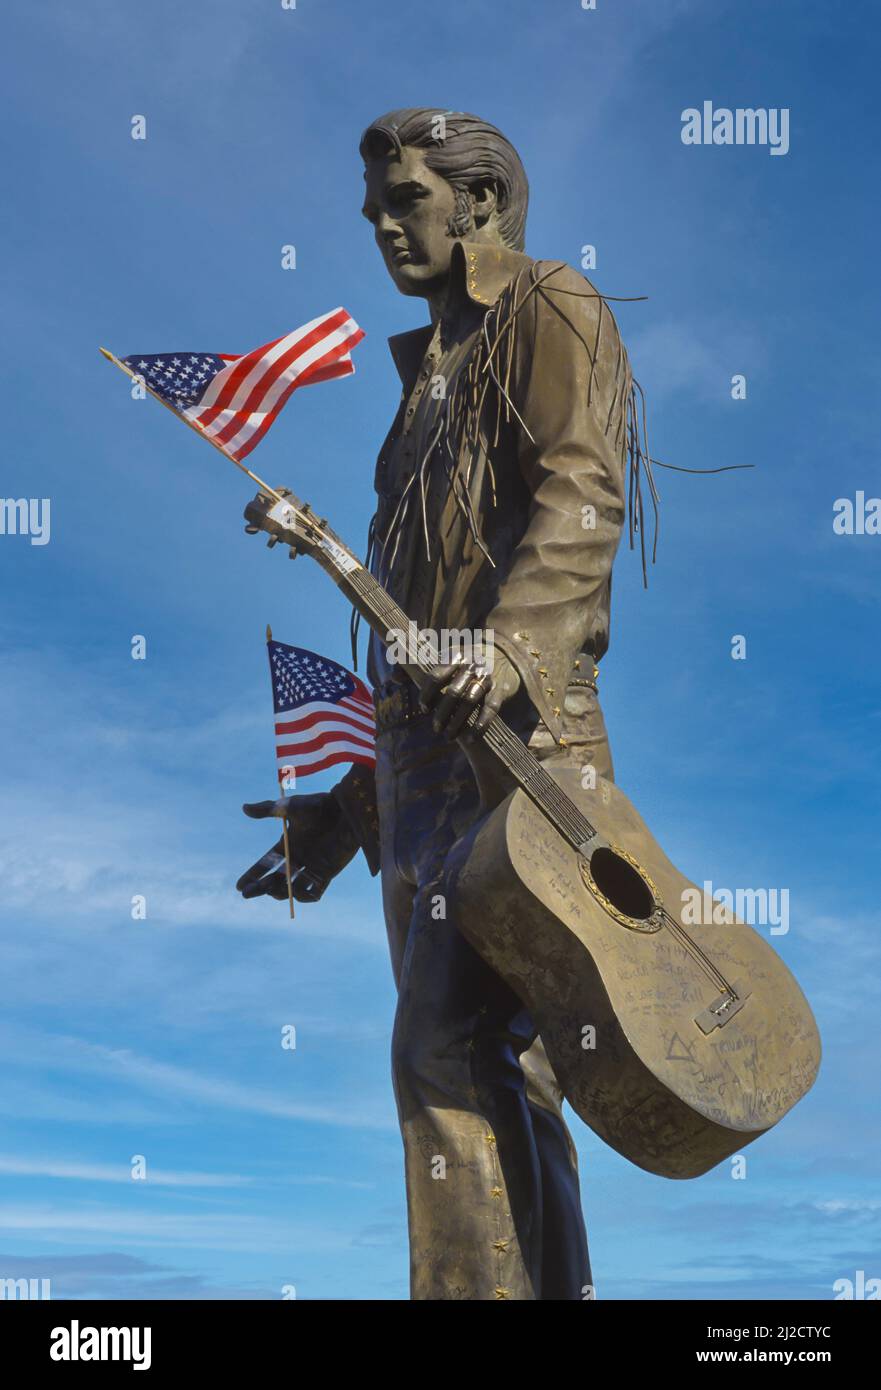 MEMPHIS, TENNESSEE, USA - Statue of musician Elvis Presley, on Beale Street, with american flags. Stock Photo